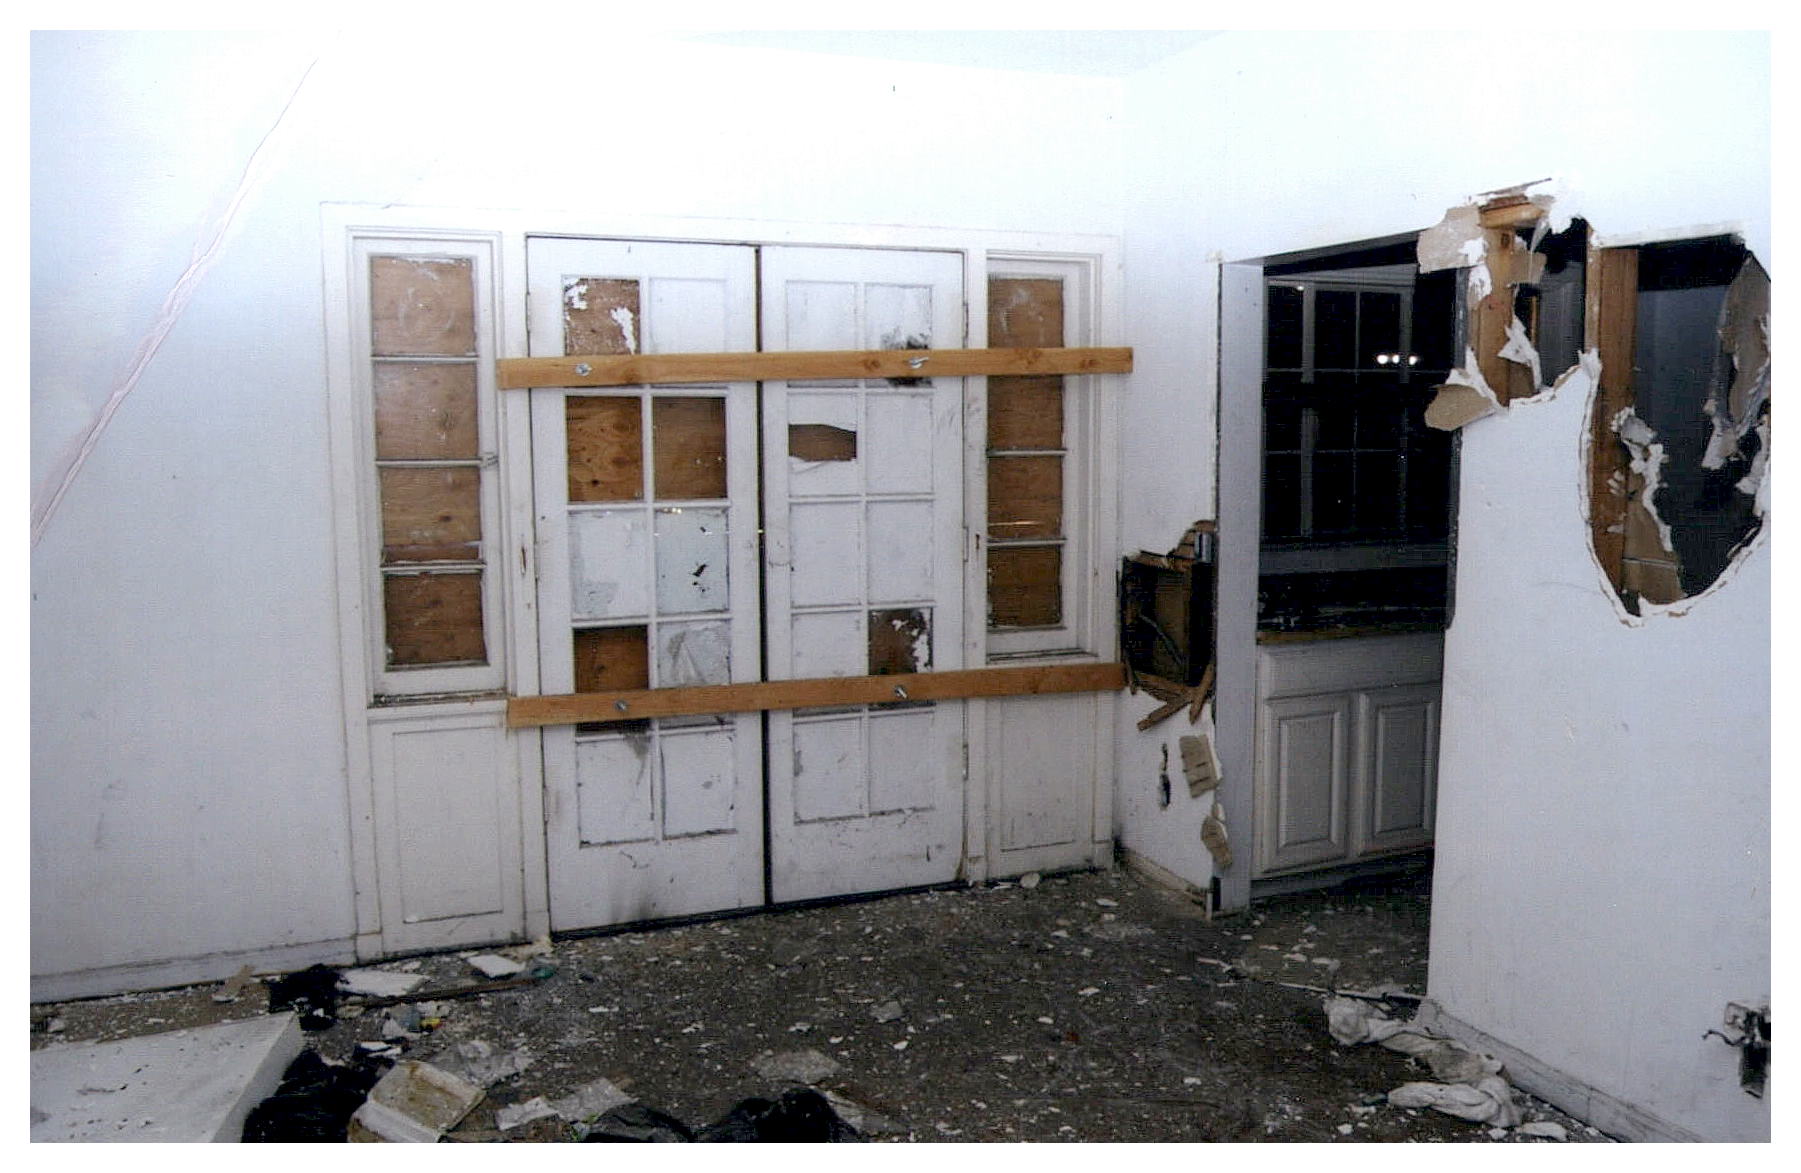 Before: same interior view of apartment with paired french doors boarded up and wall damage.